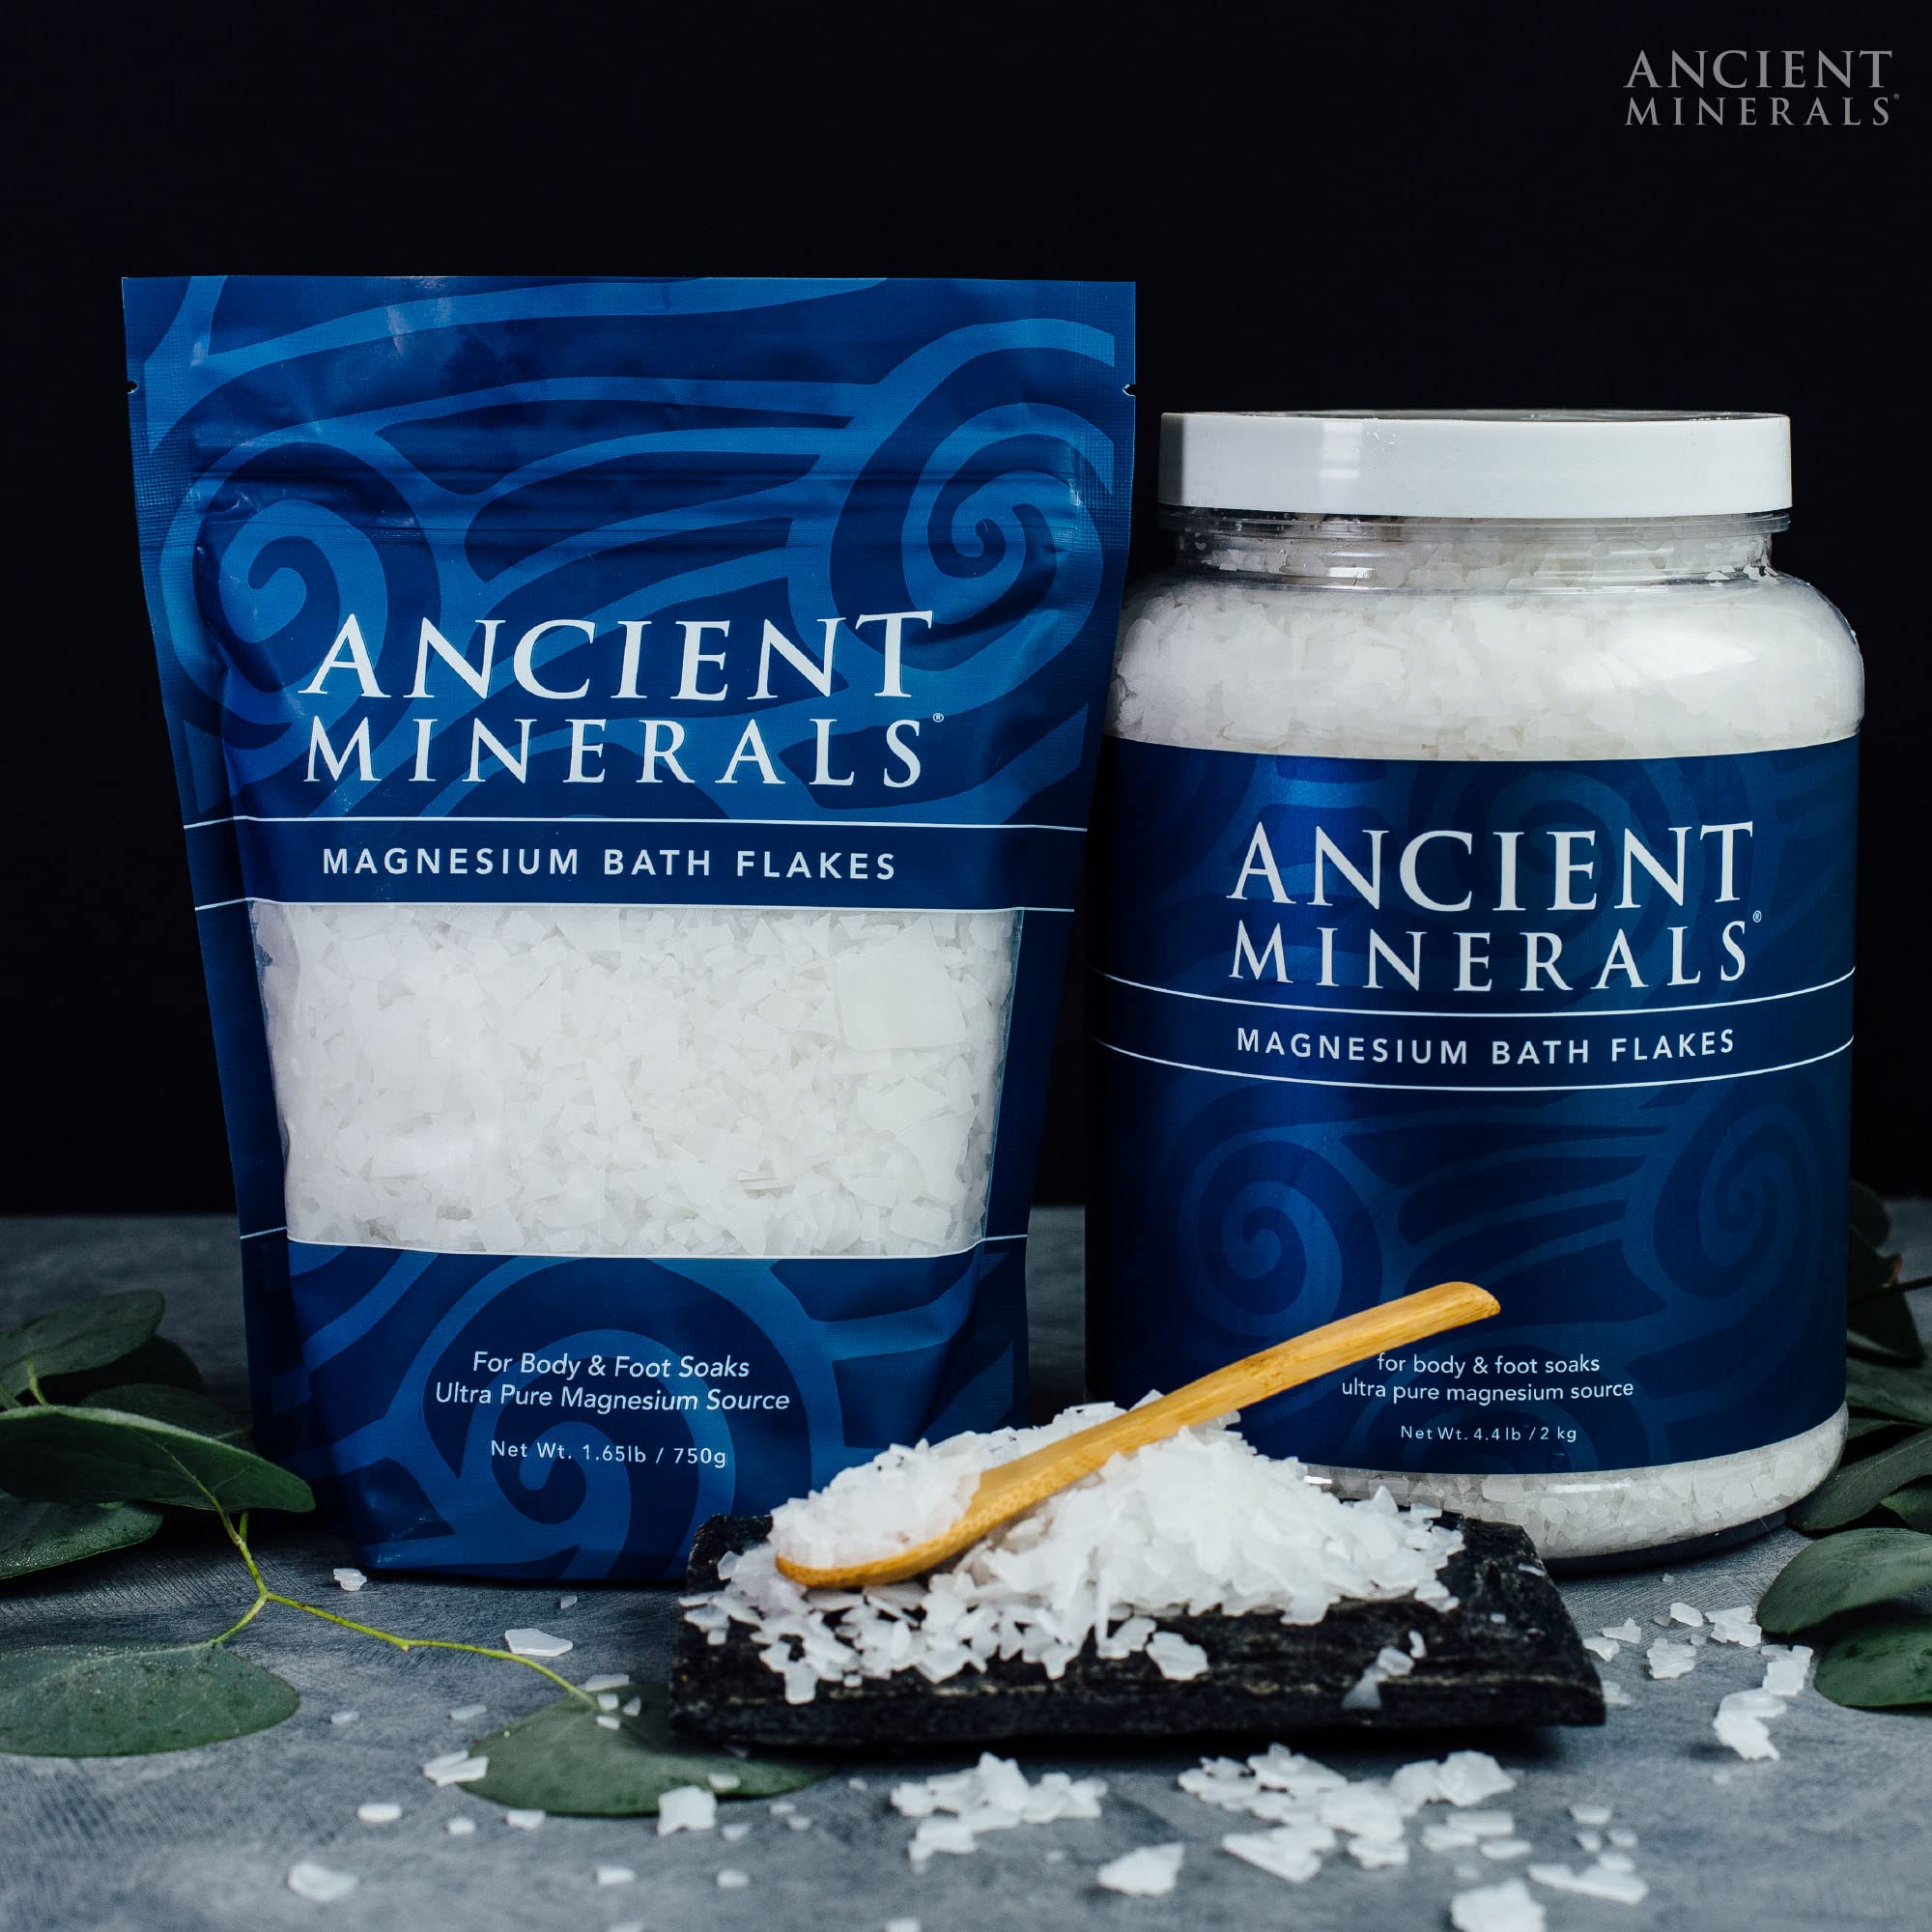 Ancient Minerals Magnesium Bath Flakes - Magnesium Oil Spray and Lotion Ultra with MSM - High-Absorption Efficiency for Relaxation, Wellness & Muscle Relief